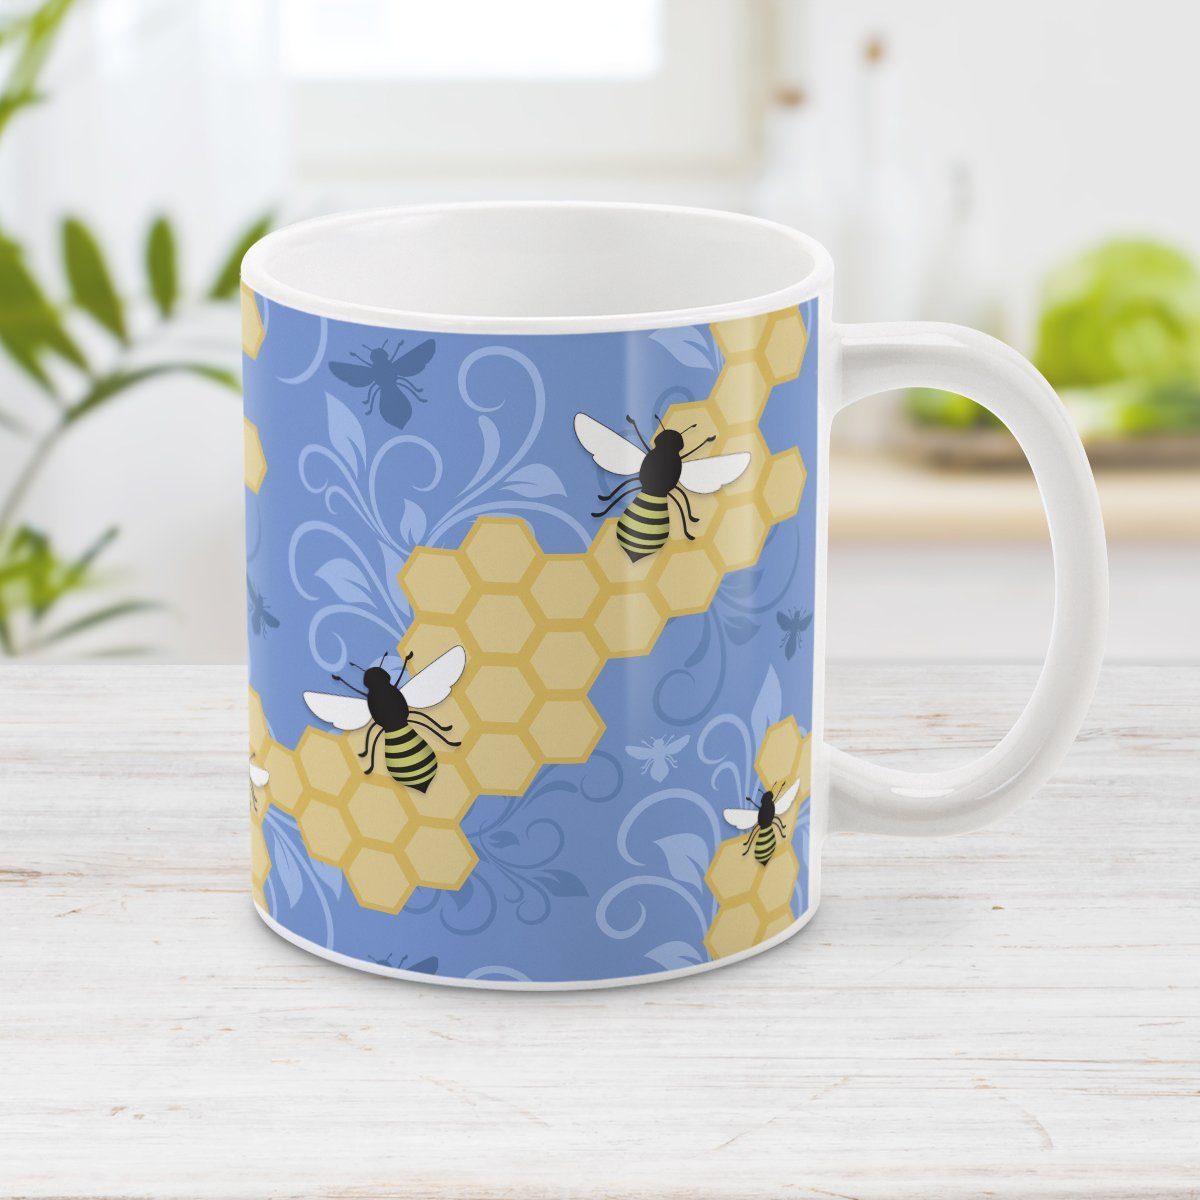 Blue Honeycomb Bee Mug at Amy's Coffee Mugs. A ceramic coffee mug designed with a pattern of black and yellow bees on honeycomb lines over a blue flourish background that wraps around the mug to the handle.